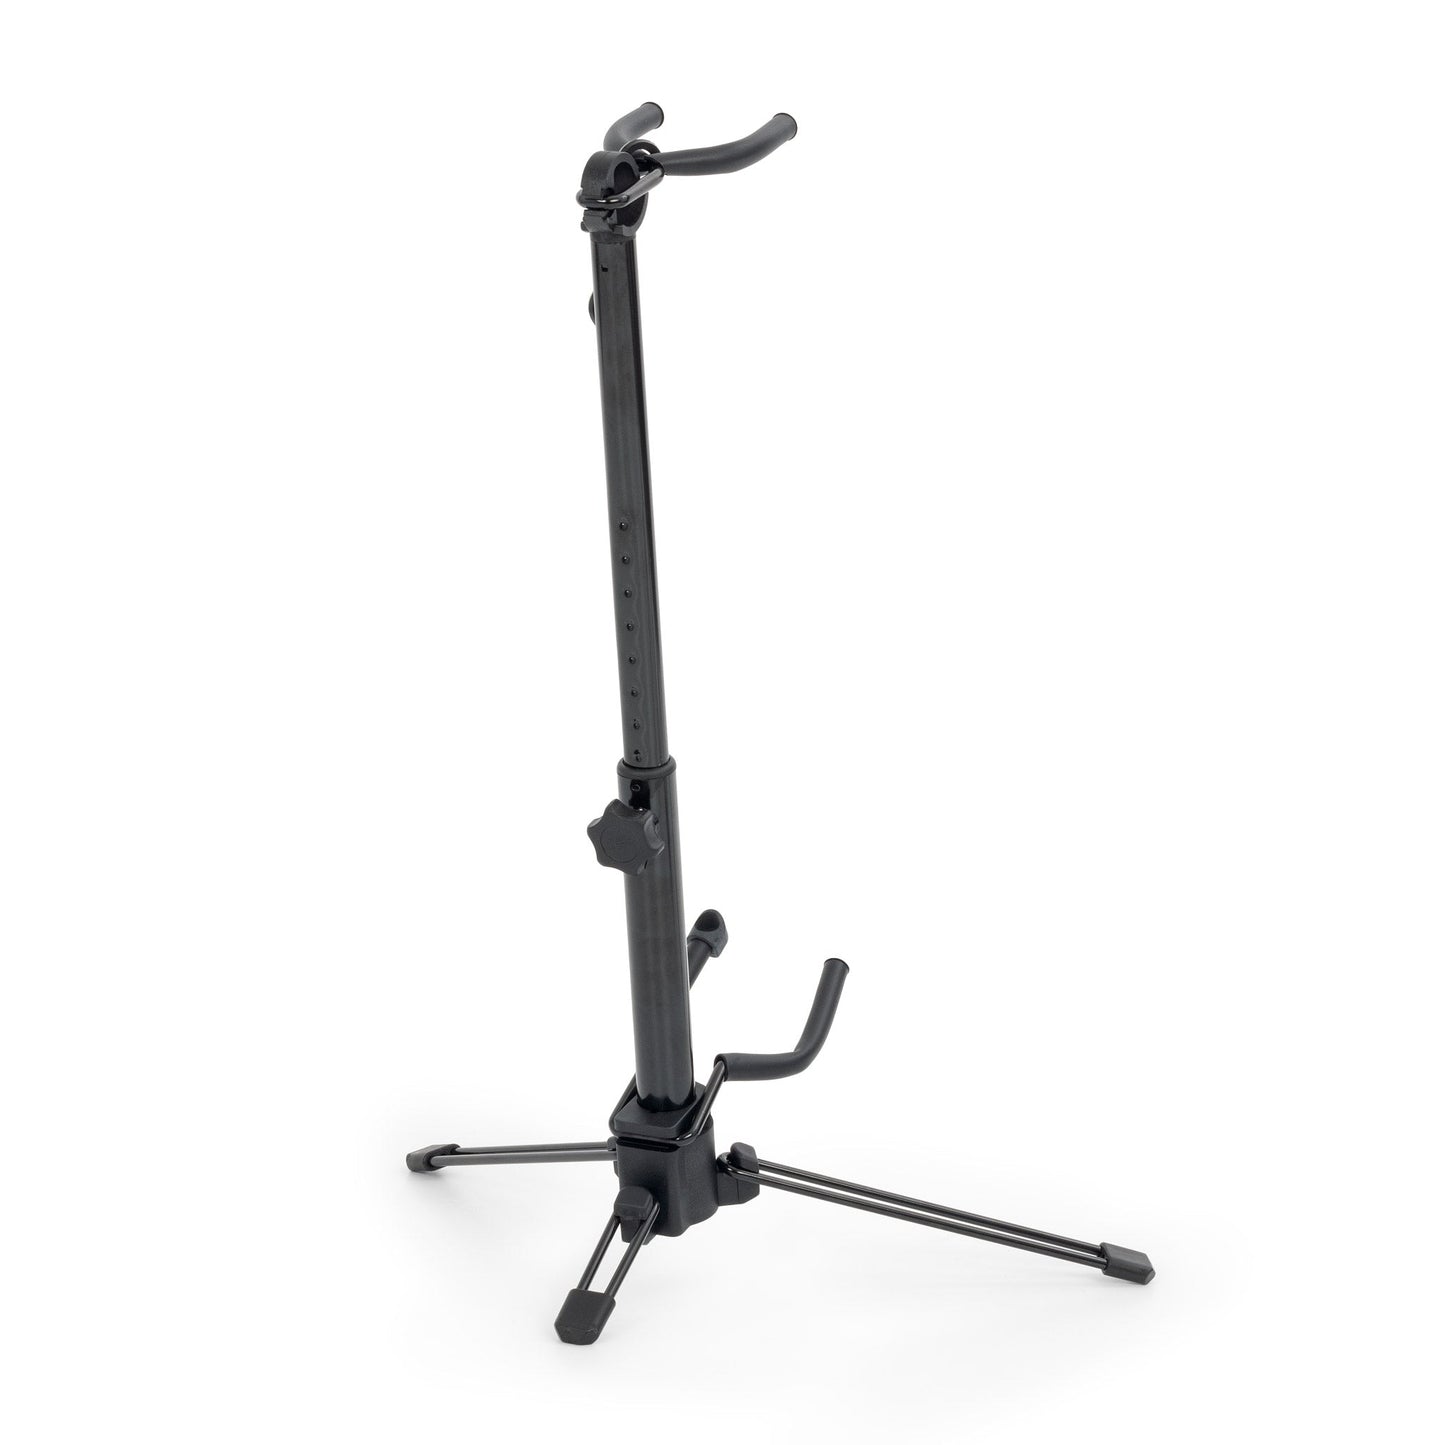 Octopus GS1650 Retractable Ukulele Stand - also suitable for violin